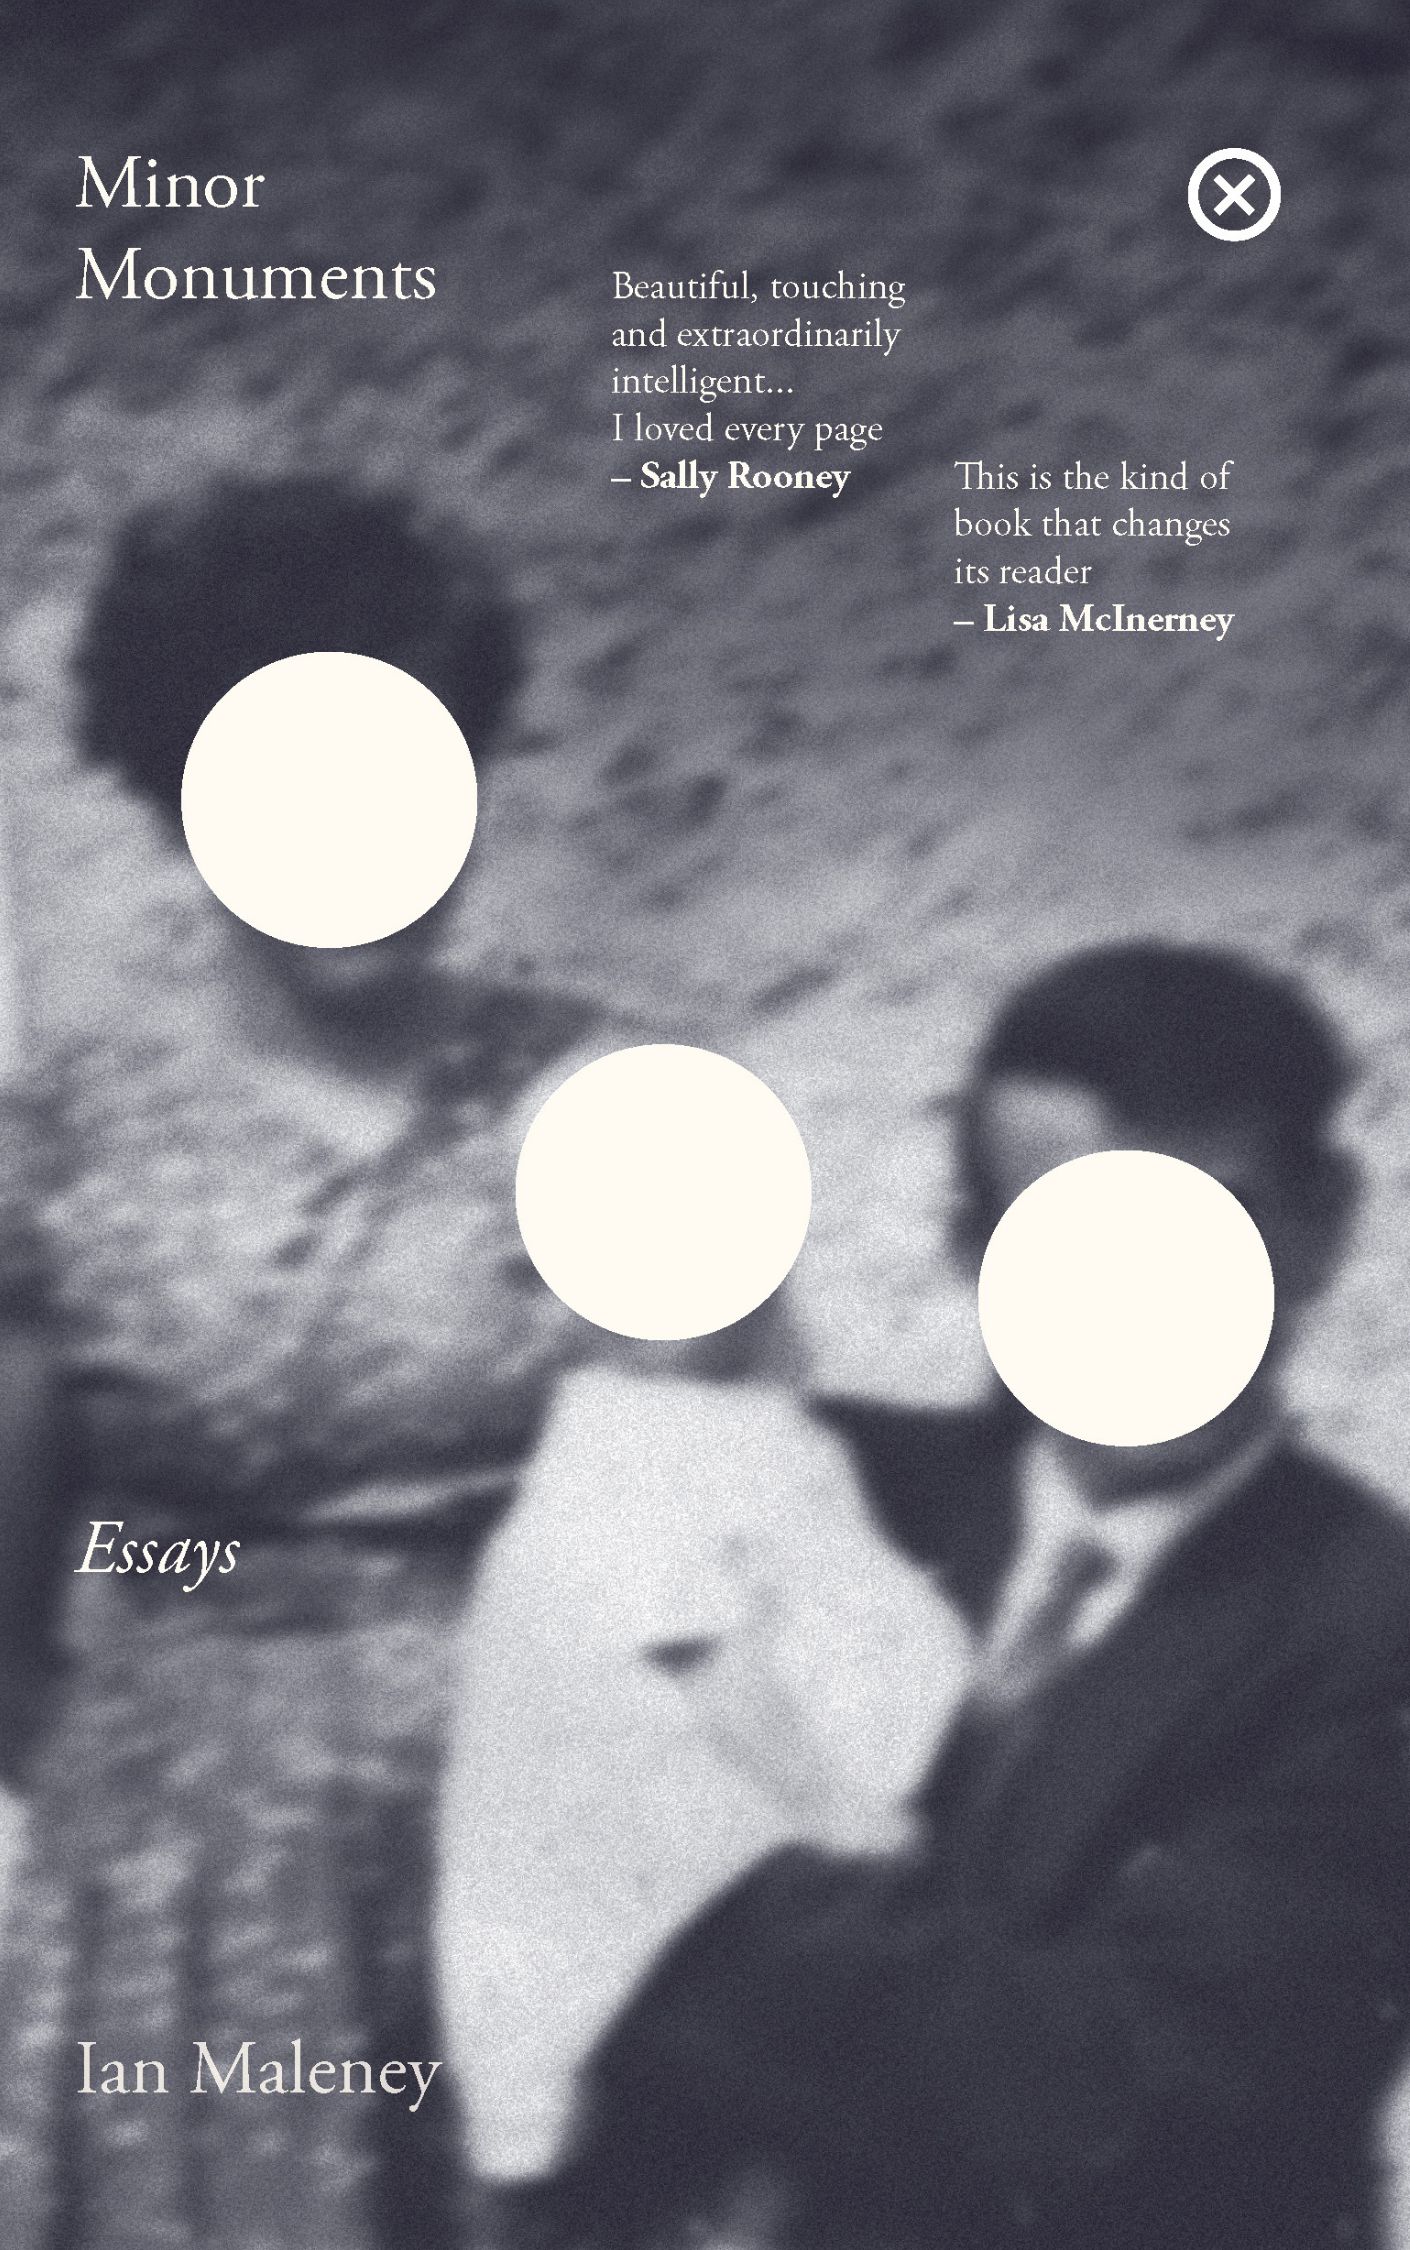 Image of an old photograph of a couple holding a small child. The photo is blurry, and their faces are deliberately obfuscated by clean pale circles. Title of book plus endorsements.